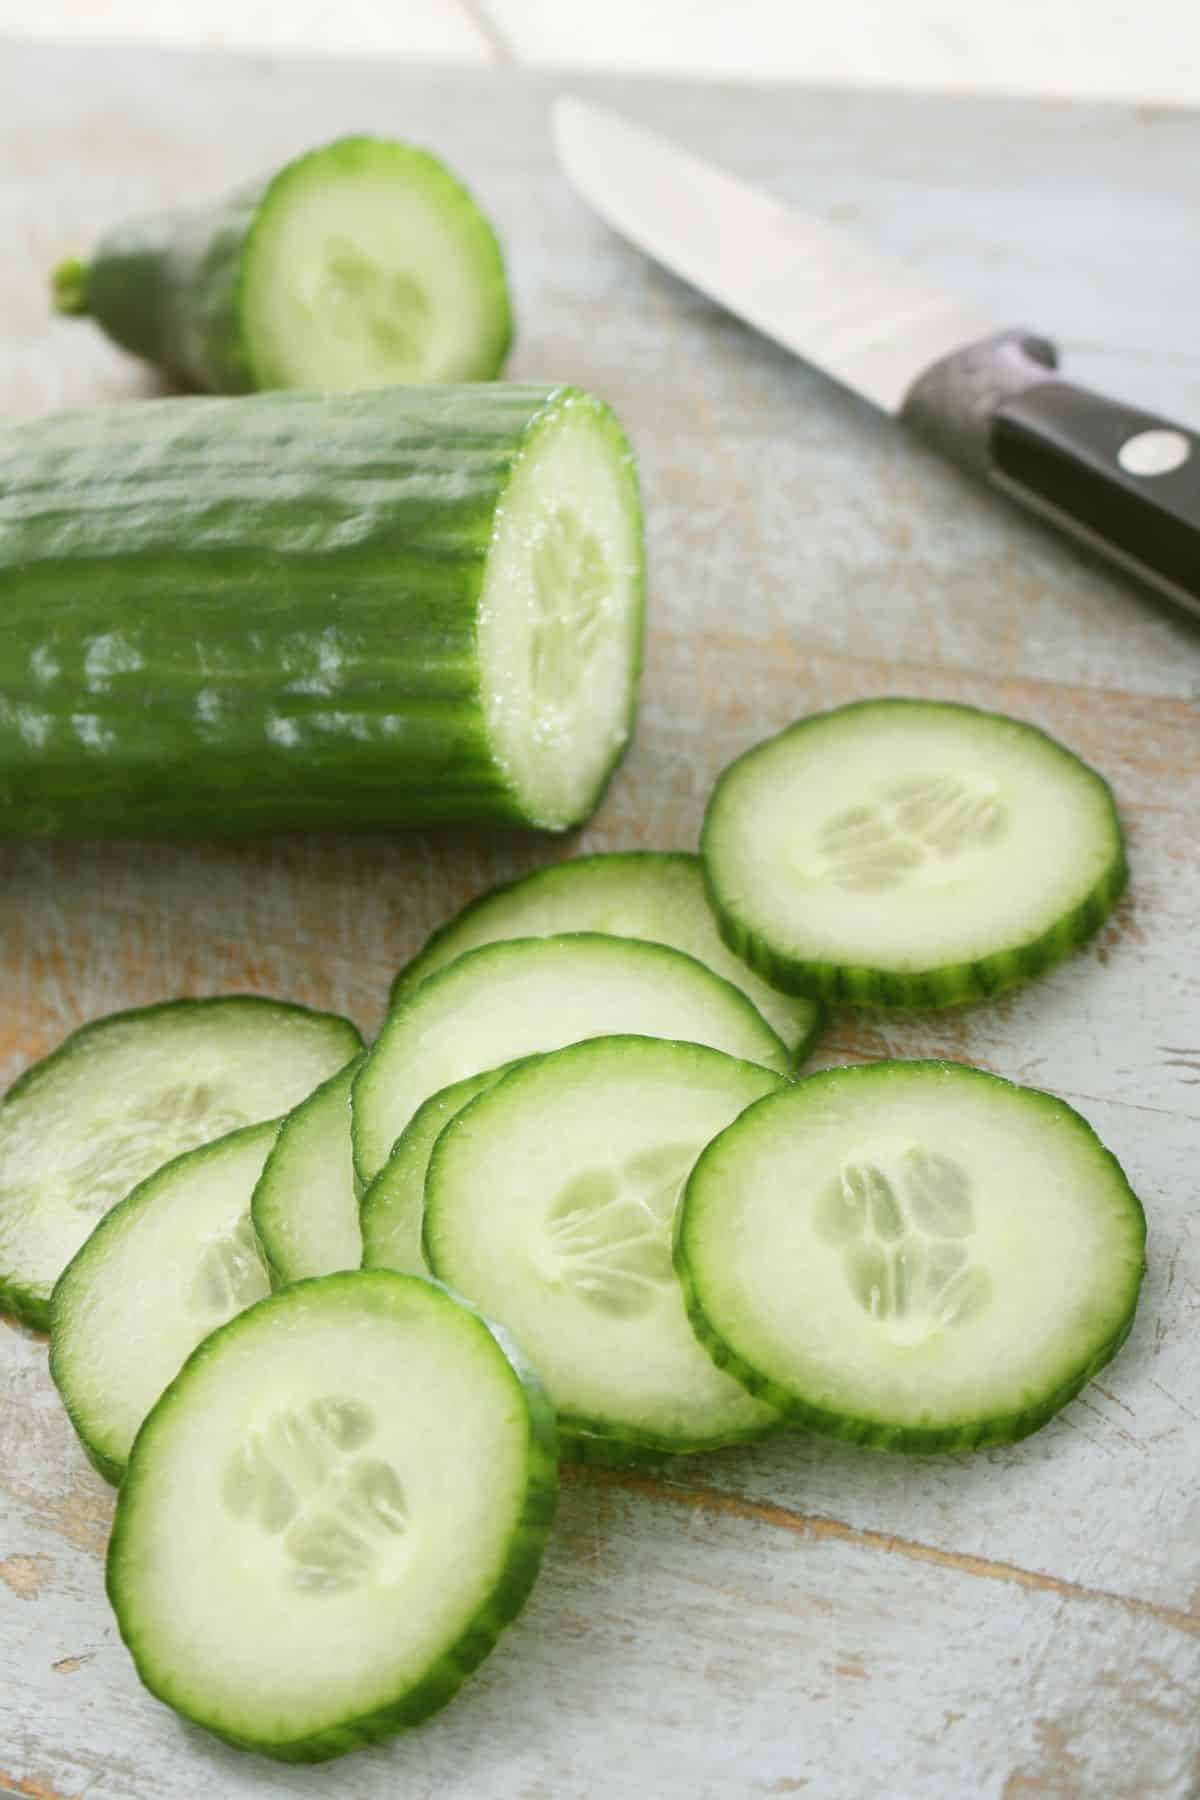 Halved and sliced cucumber on wooden surface.